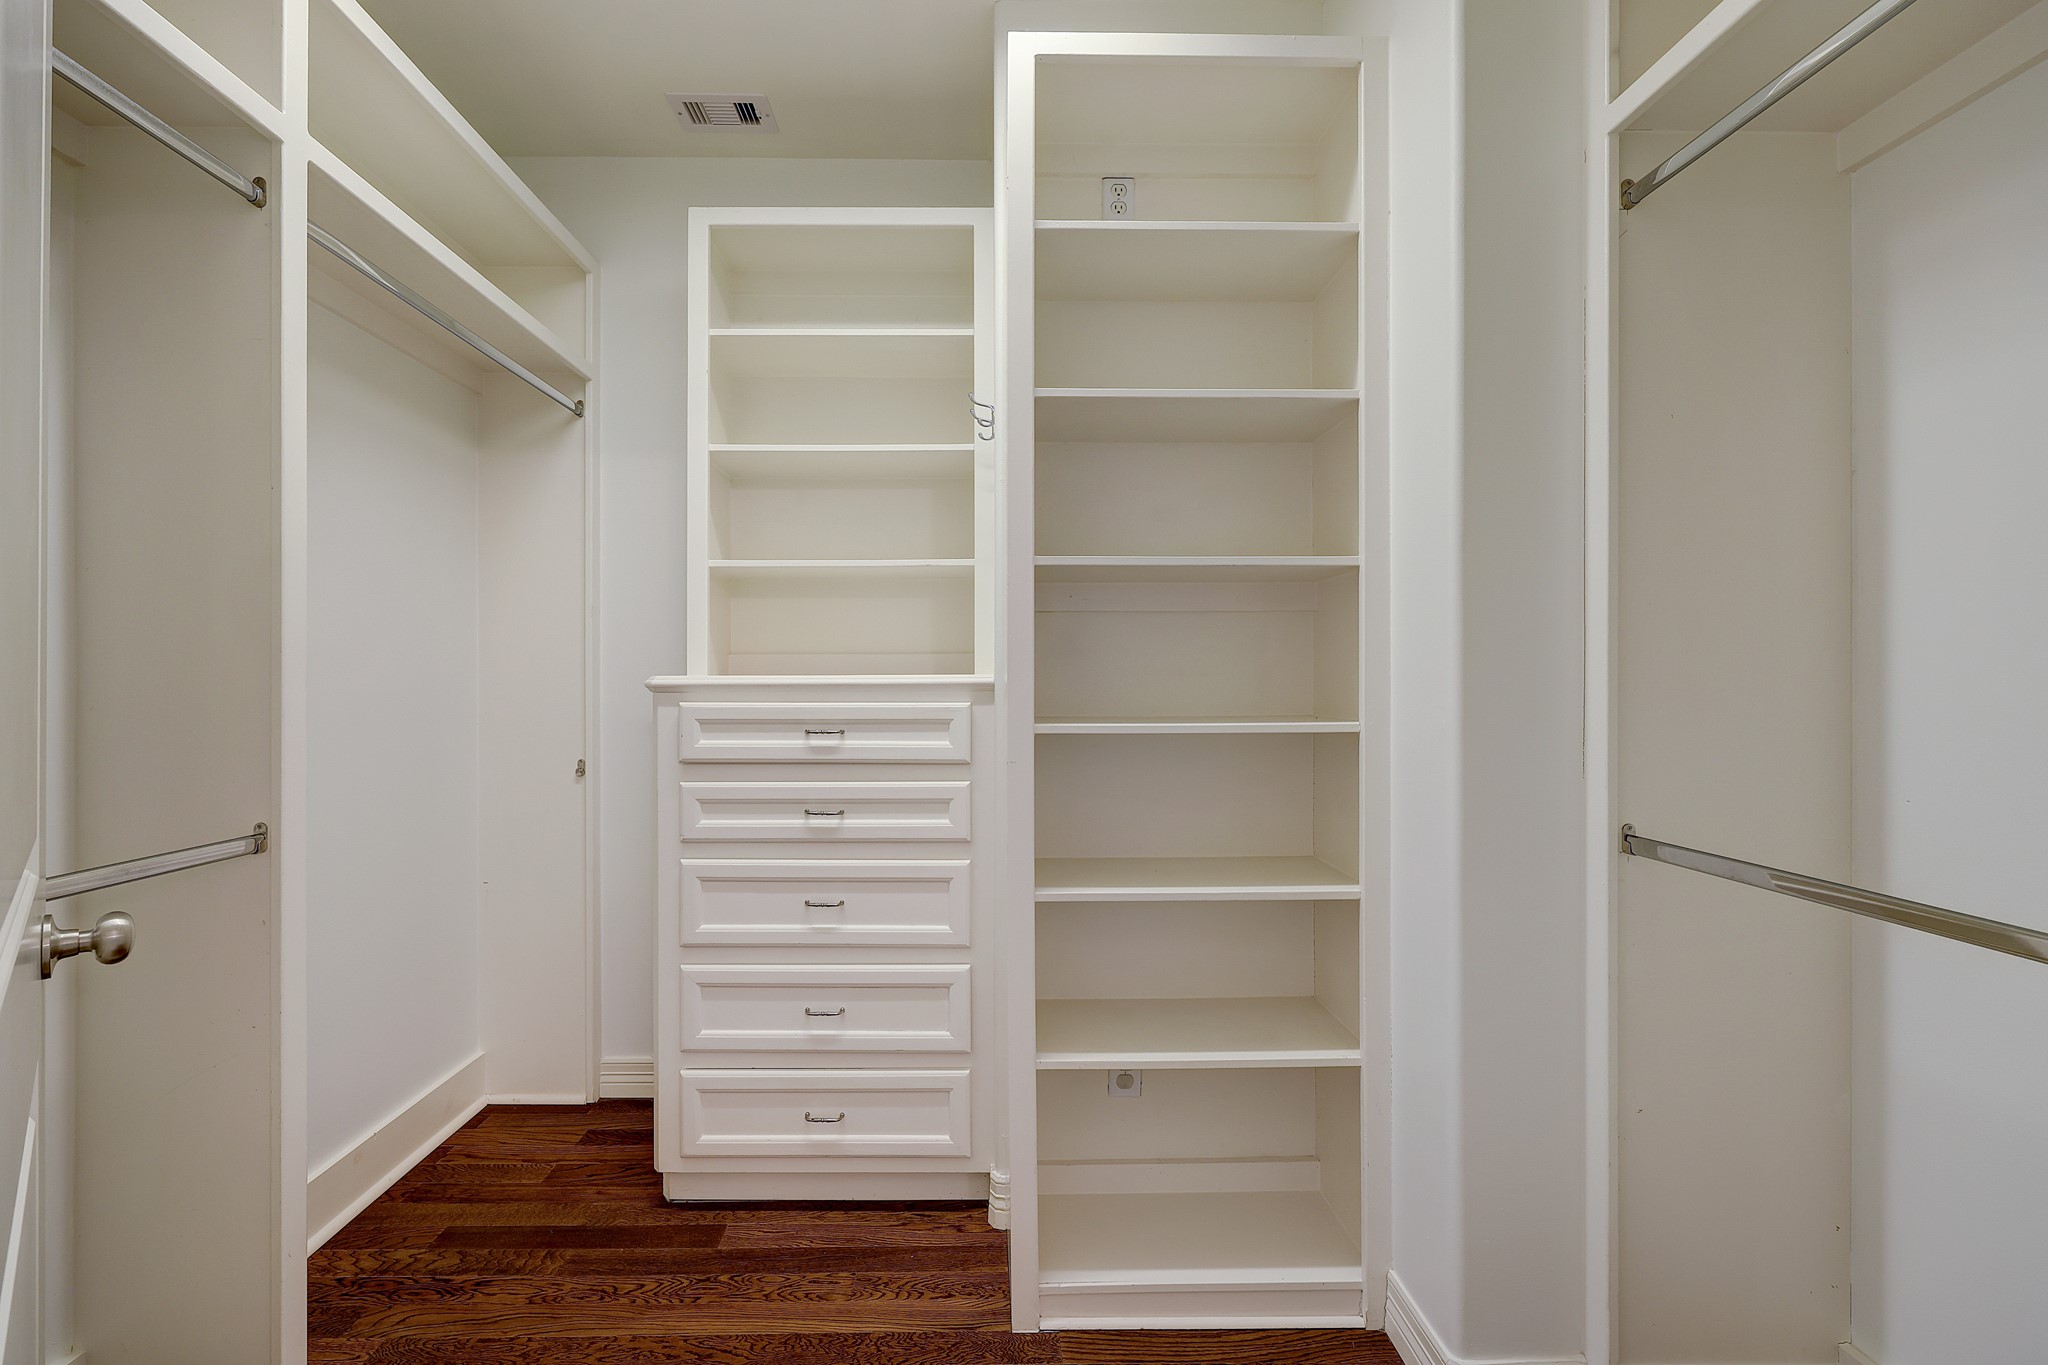 Explore the ample storage possibilities in the second walk-in closet of the owner's suite where space and organization are in abundance. This closet offers extensive shelving, hanging rods, and a built-in chest of drawers, ensuring that every piece of attire and accessory has a dedicated spot. With a smart layout and practical design, this closet is a testament to the thoughtful details that make this home stand out.